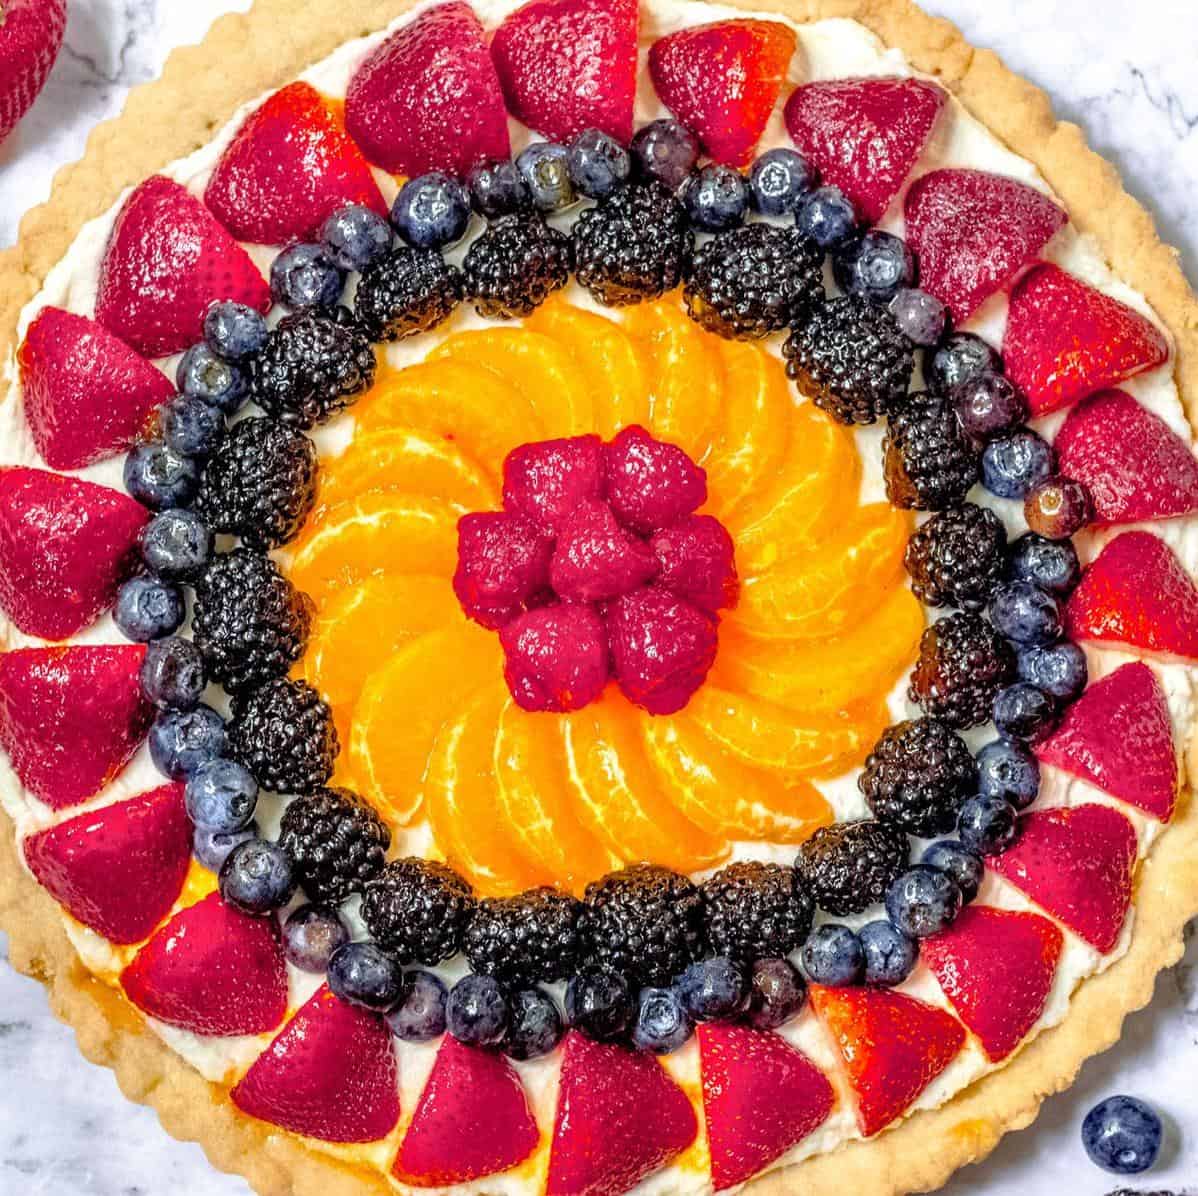  These tarts are as pretty as they are delicious!